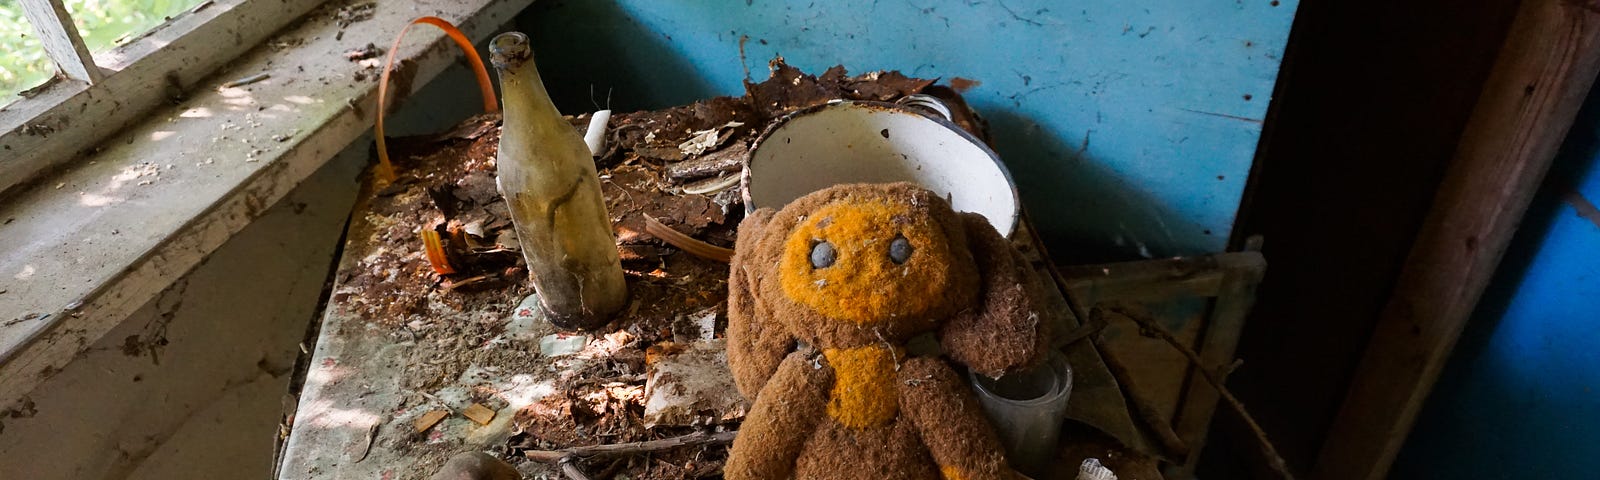 War photo from Ukraine showing a filthy house covered with dirt and debris. On a table is an old stuffed animal, some yellowed papers and some dirty dishes.